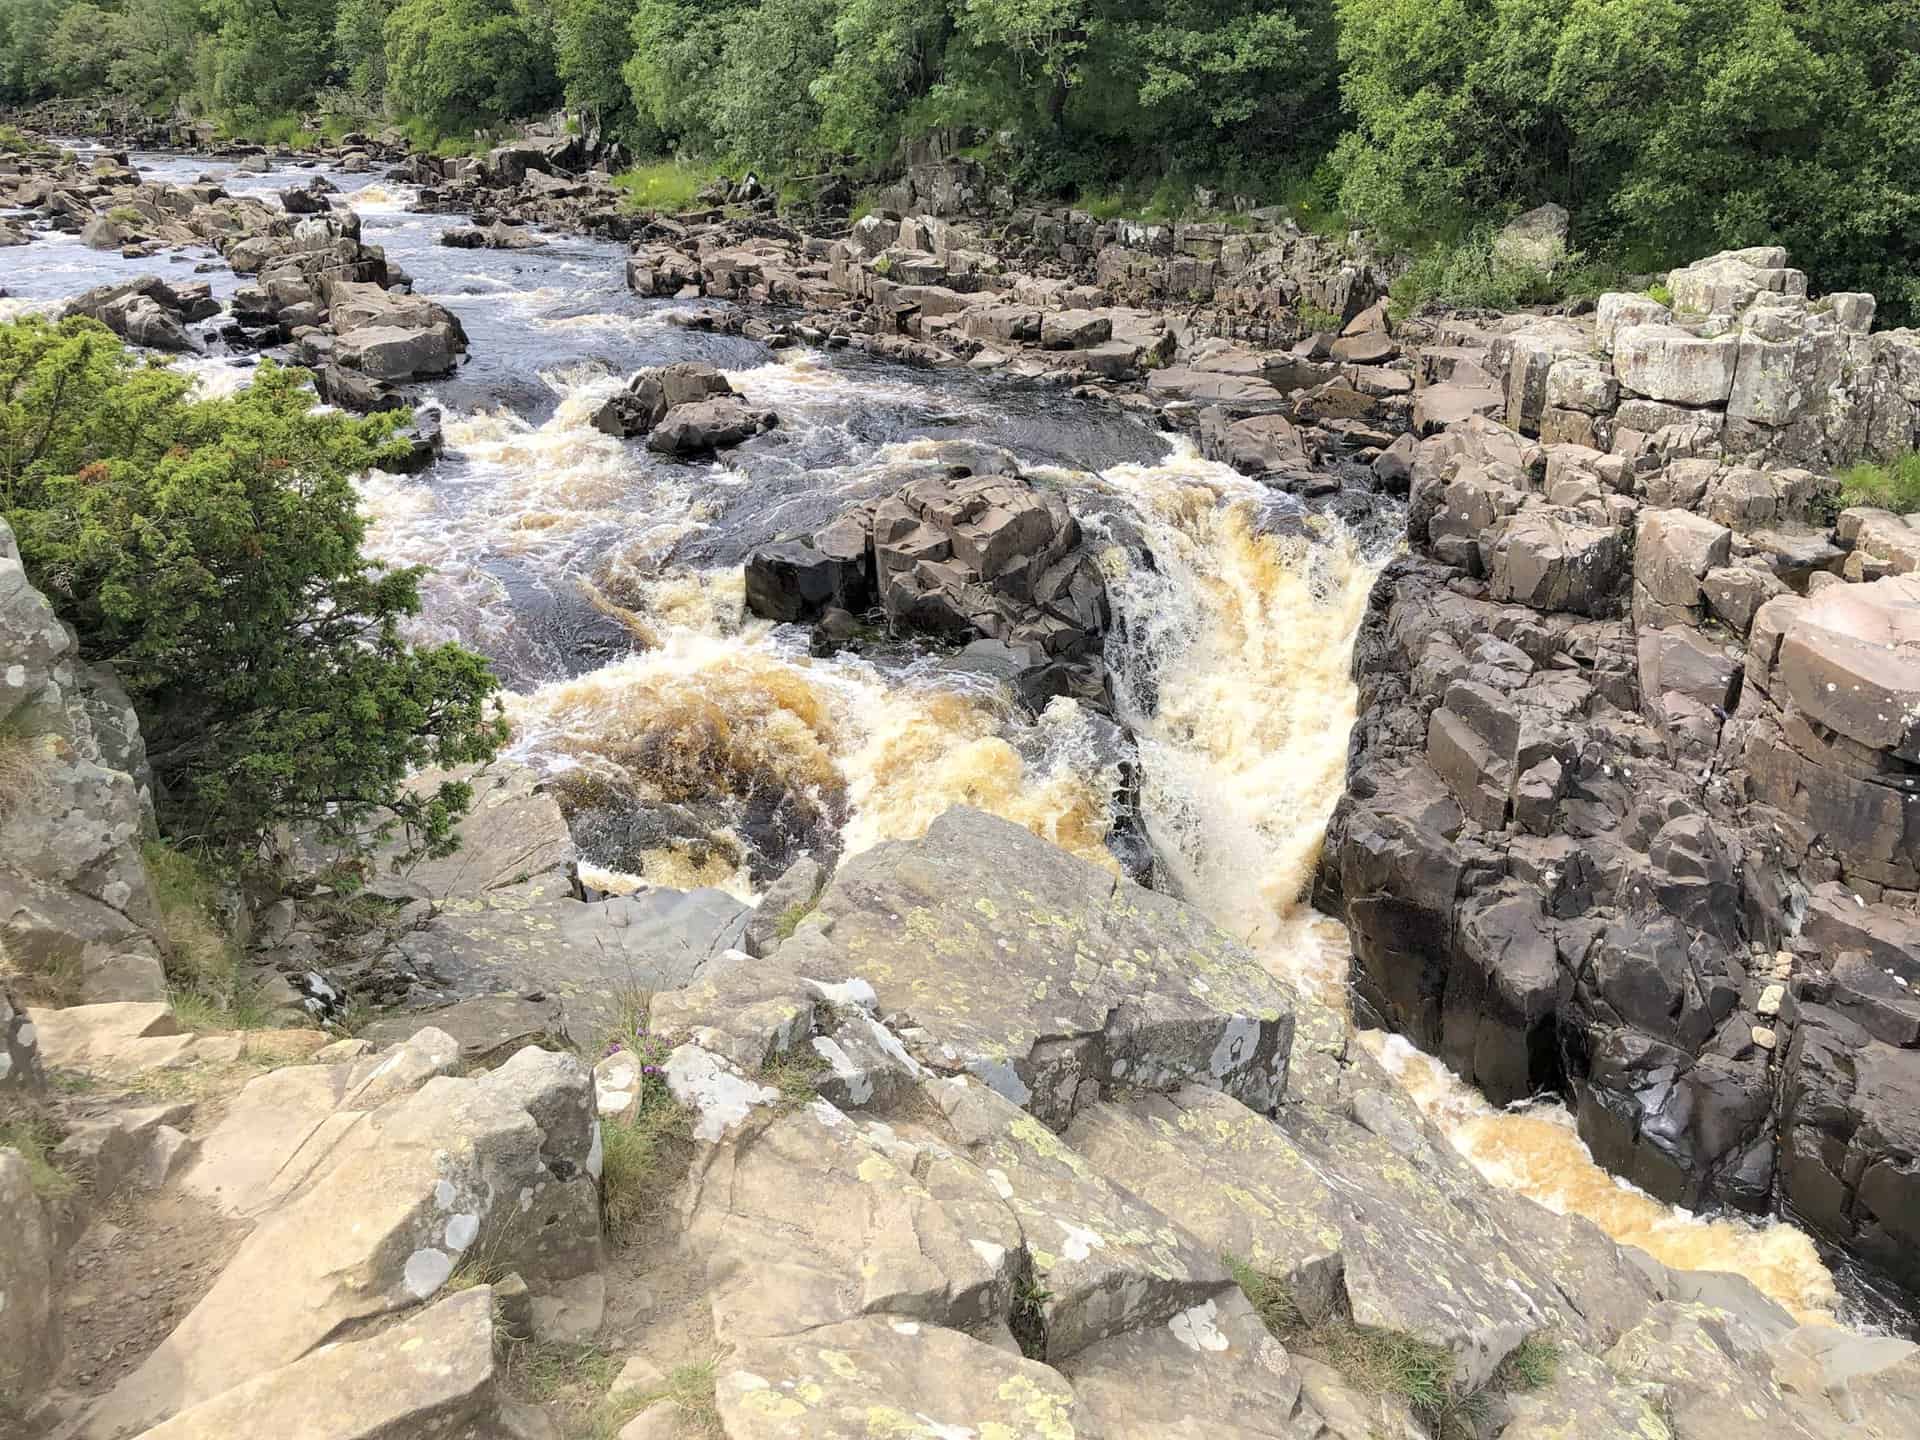 High Force, a spectacular waterfall on the River Tees, stands as one of the most impressive natural features in the area, about five miles north-west of Middleton-in-Teesdale. At High Force you are roughly three-quarters of the way round this High Force waterfall walk.